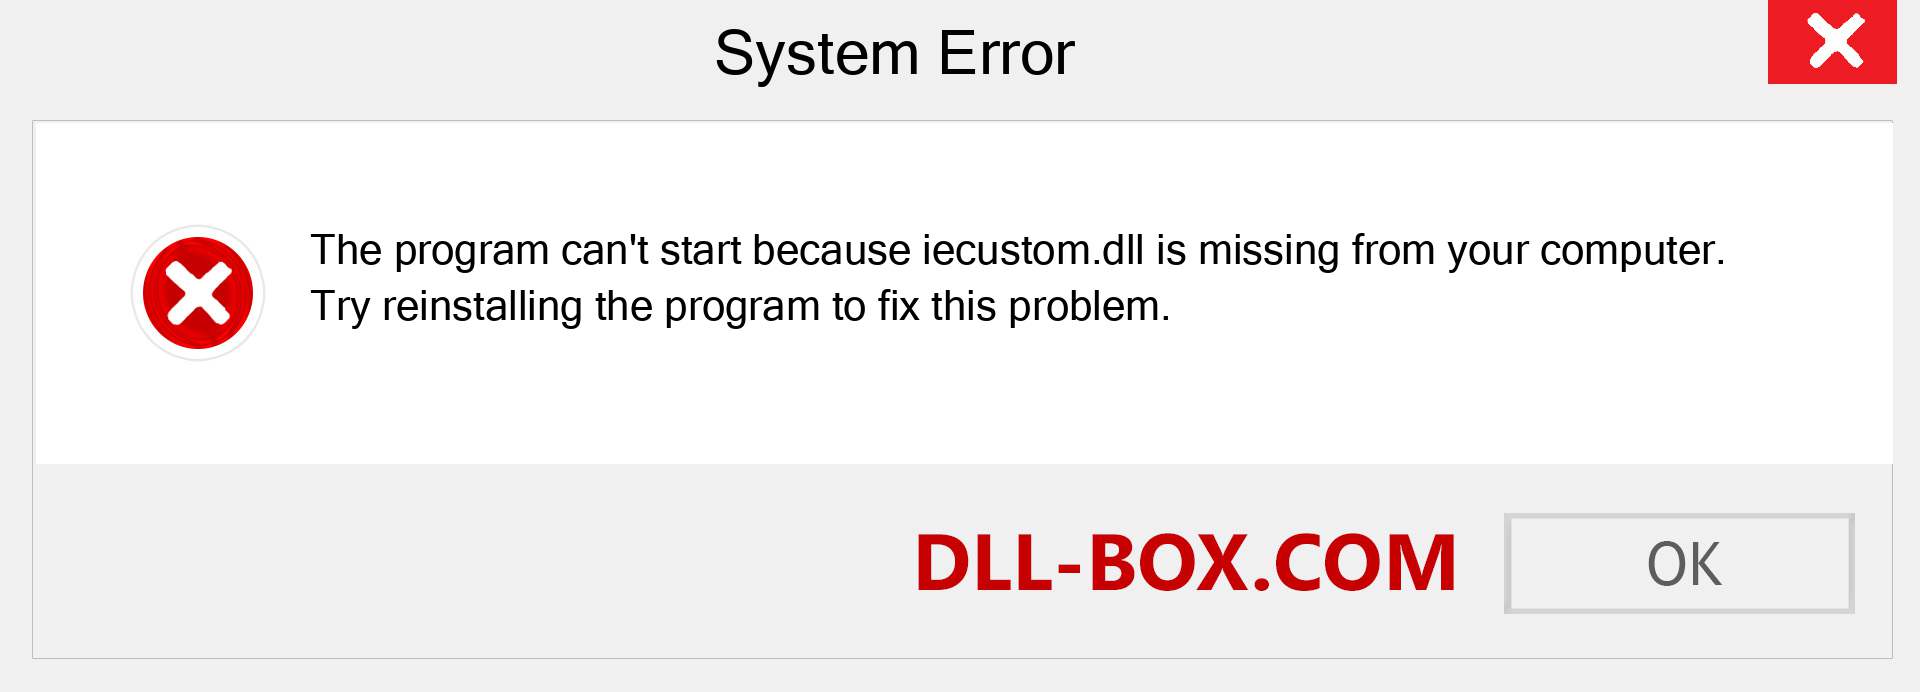  iecustom.dll file is missing?. Download for Windows 7, 8, 10 - Fix  iecustom dll Missing Error on Windows, photos, images